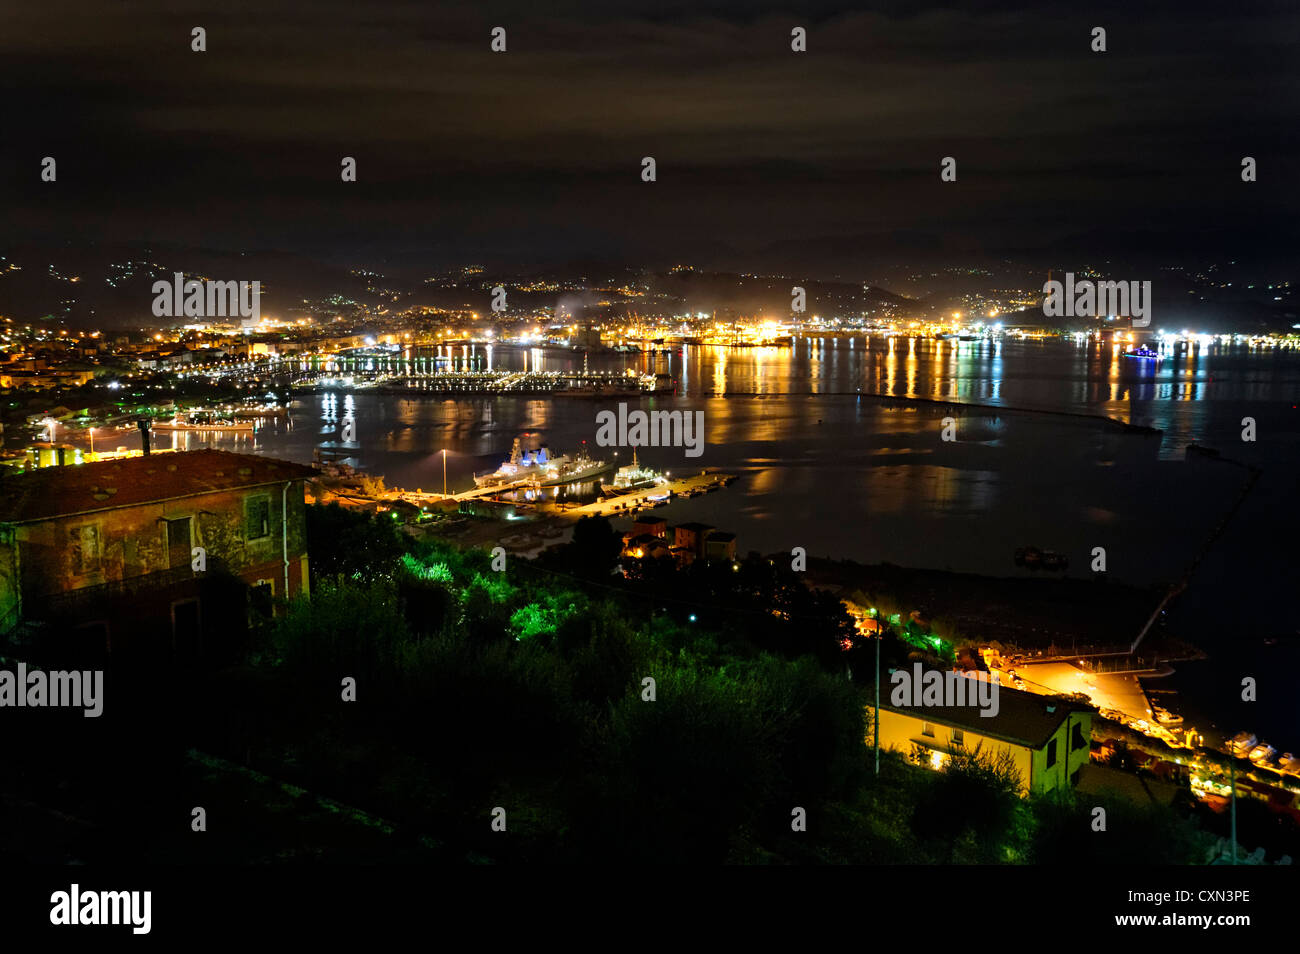 La Spezia habour at night, panoramic  view with city lights, naval vessels and coastline Stock Photo